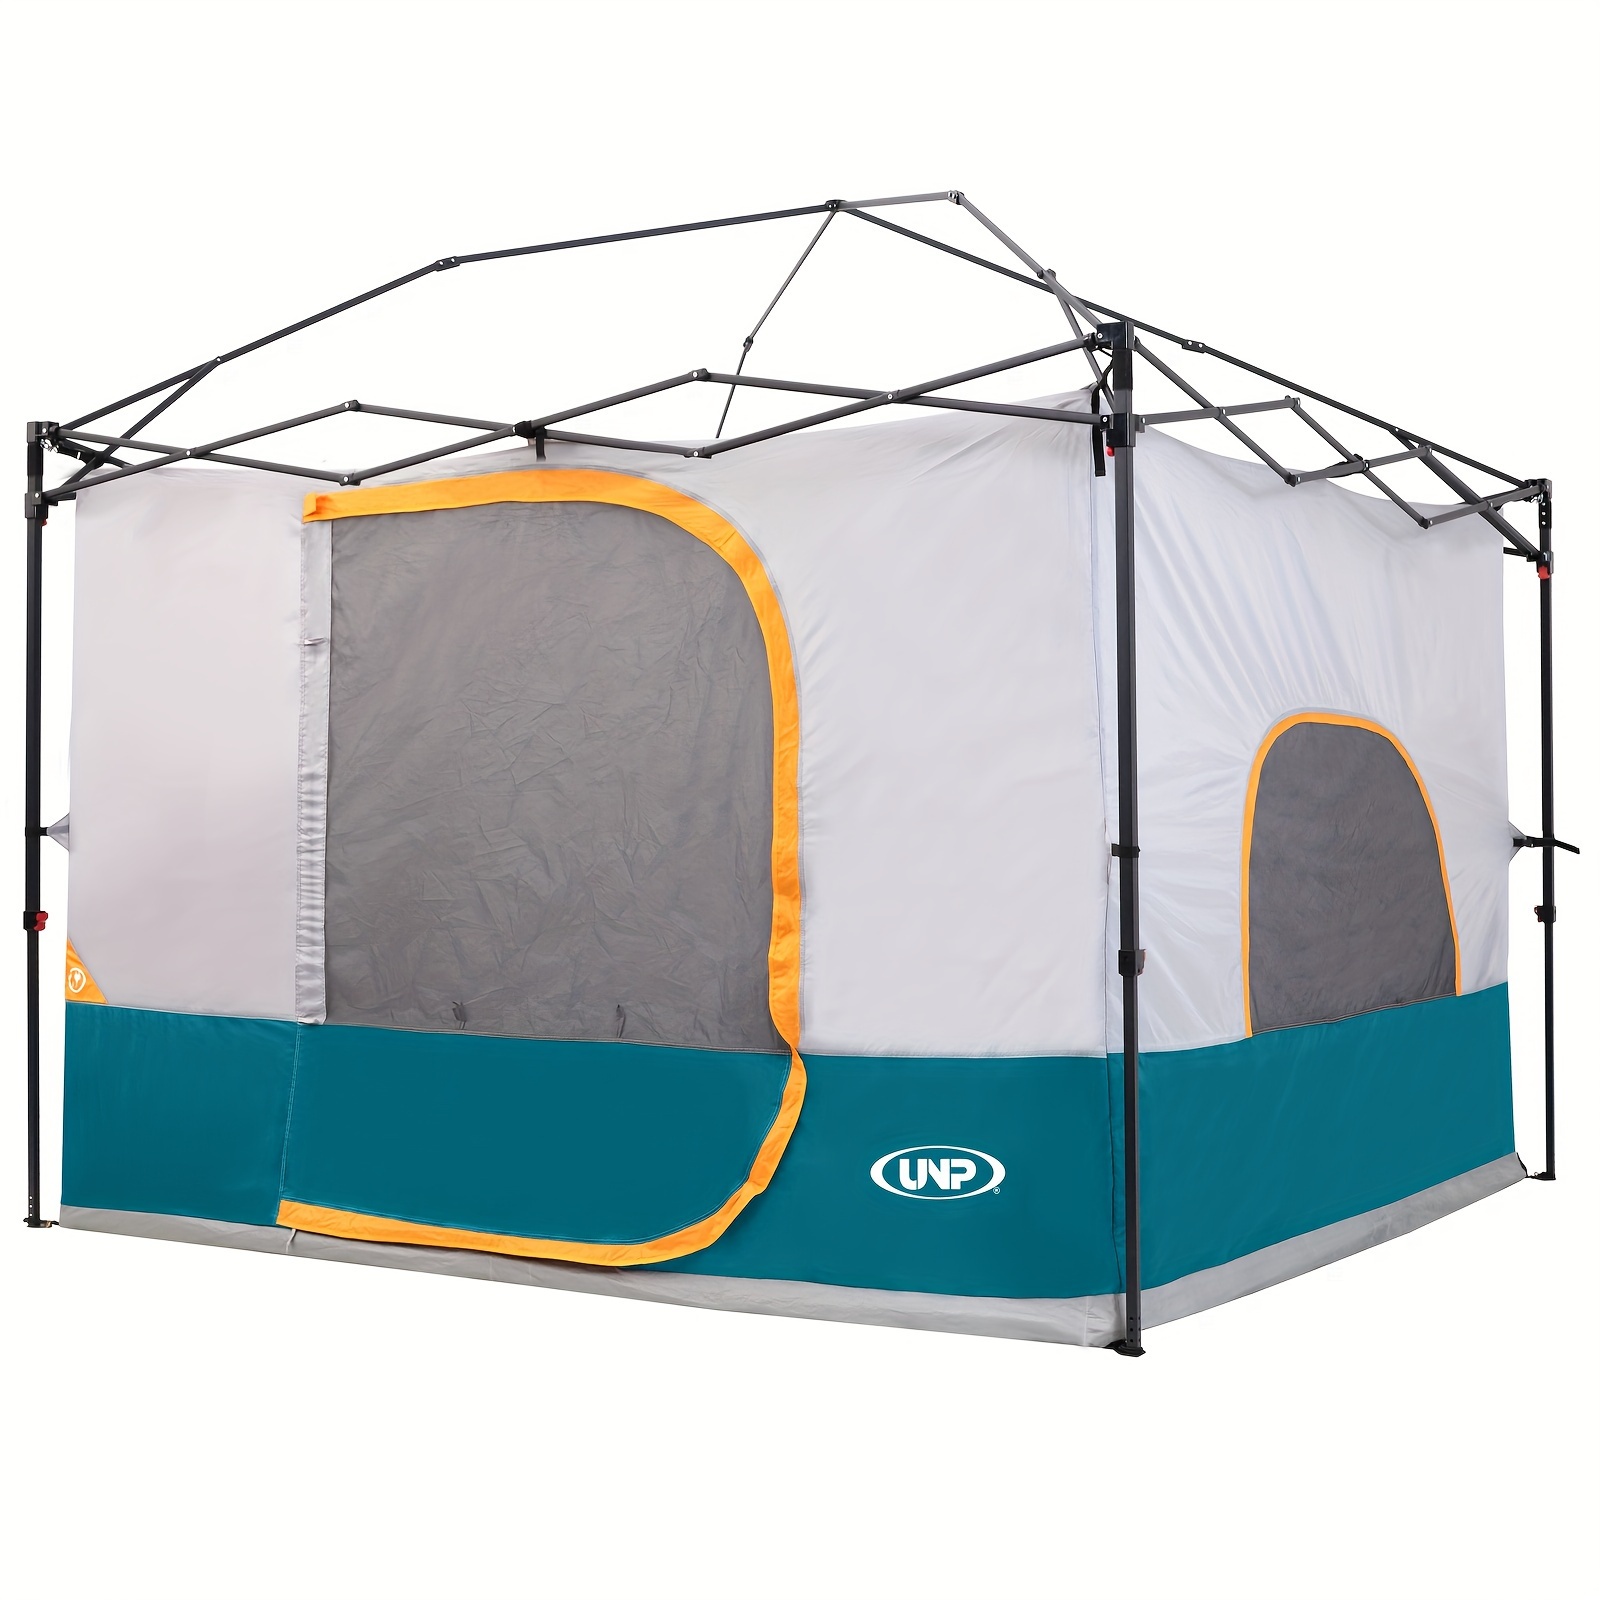 900+ Camping Gear Clearance ideas